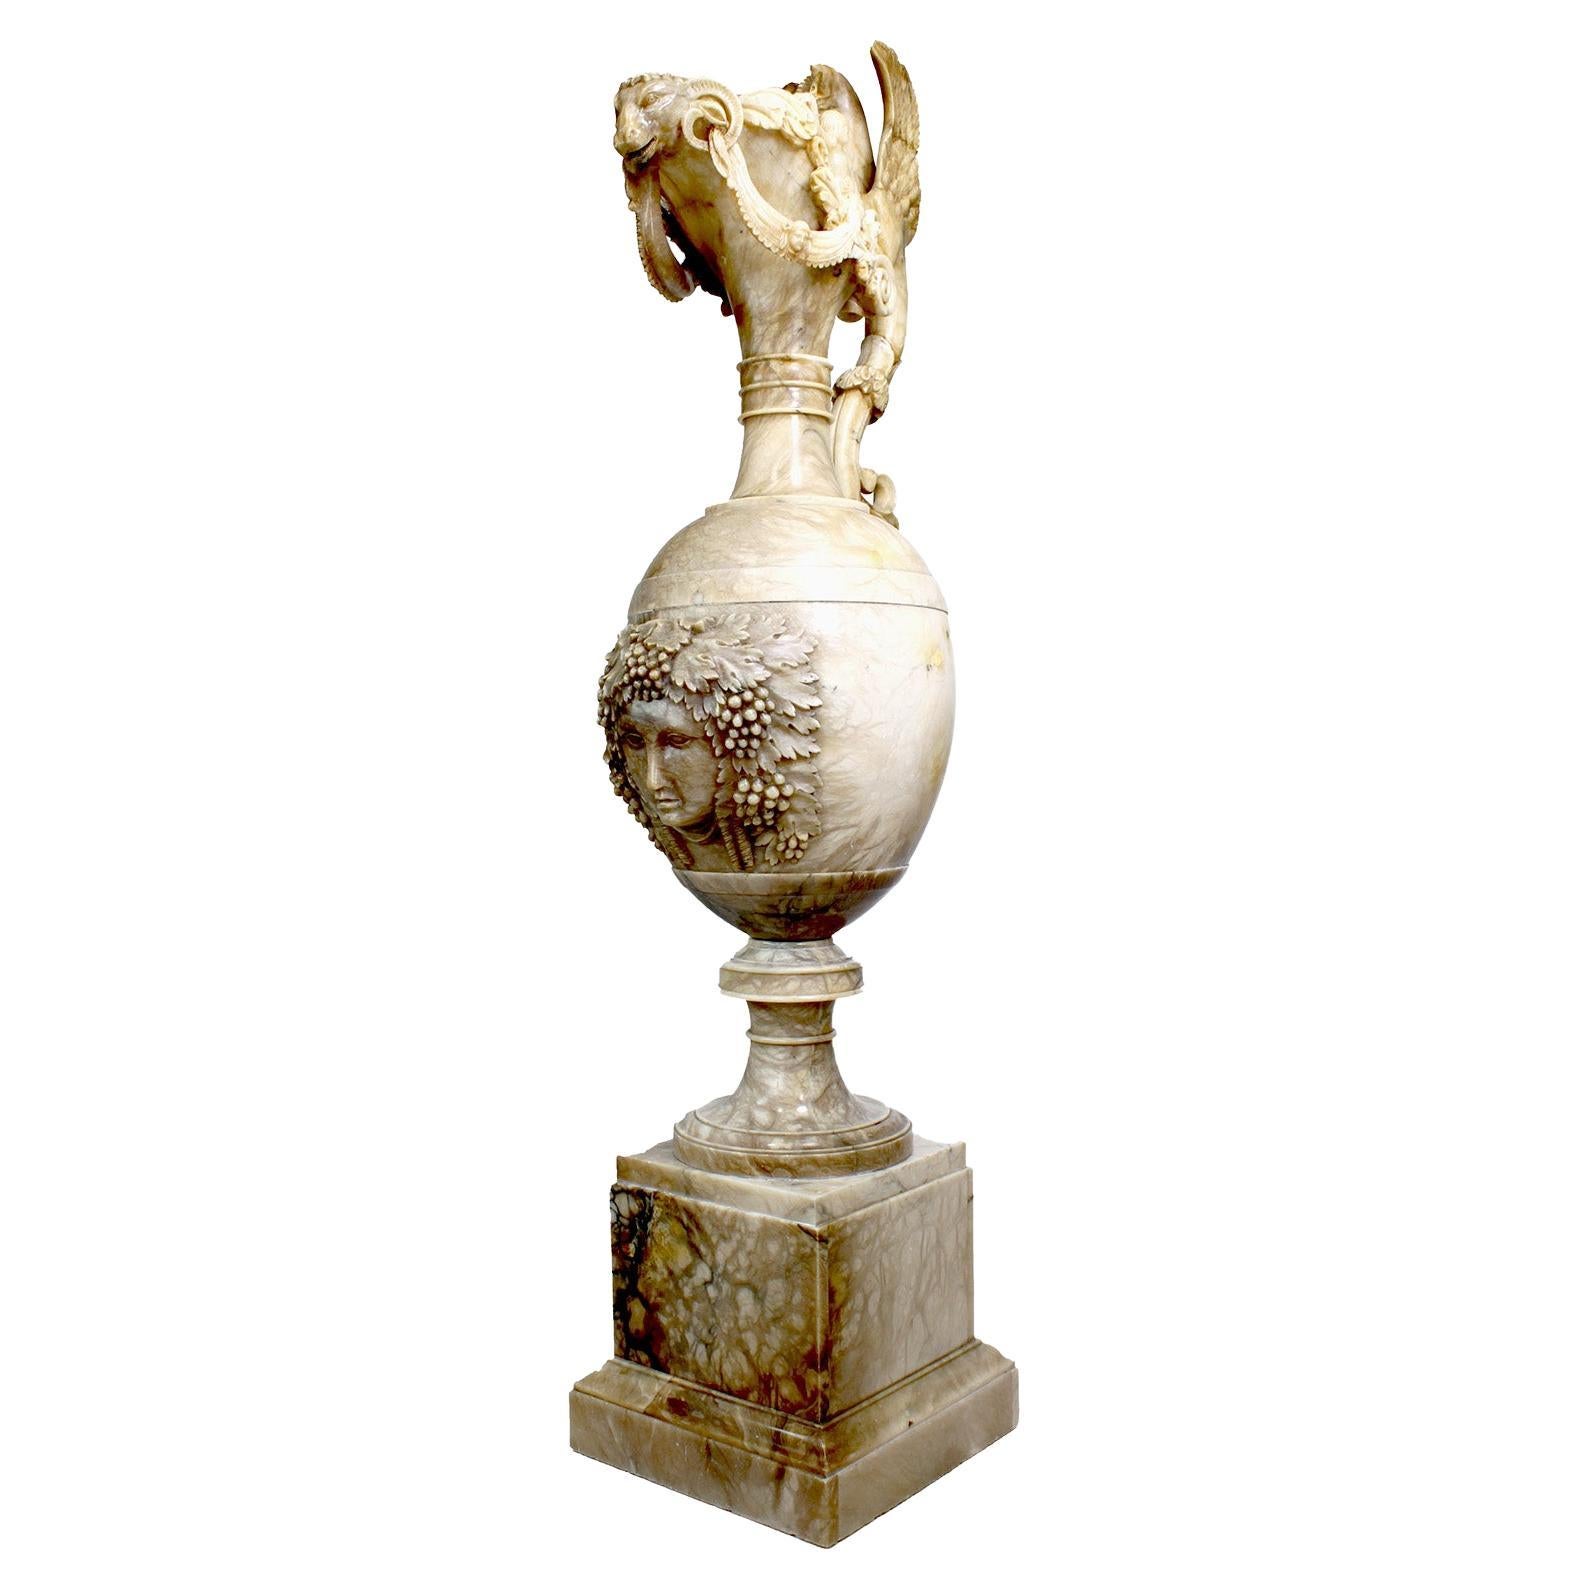 Monumental Italian 19th Century Renaissance Revival Style Carved Alabaster Urn  For Sale